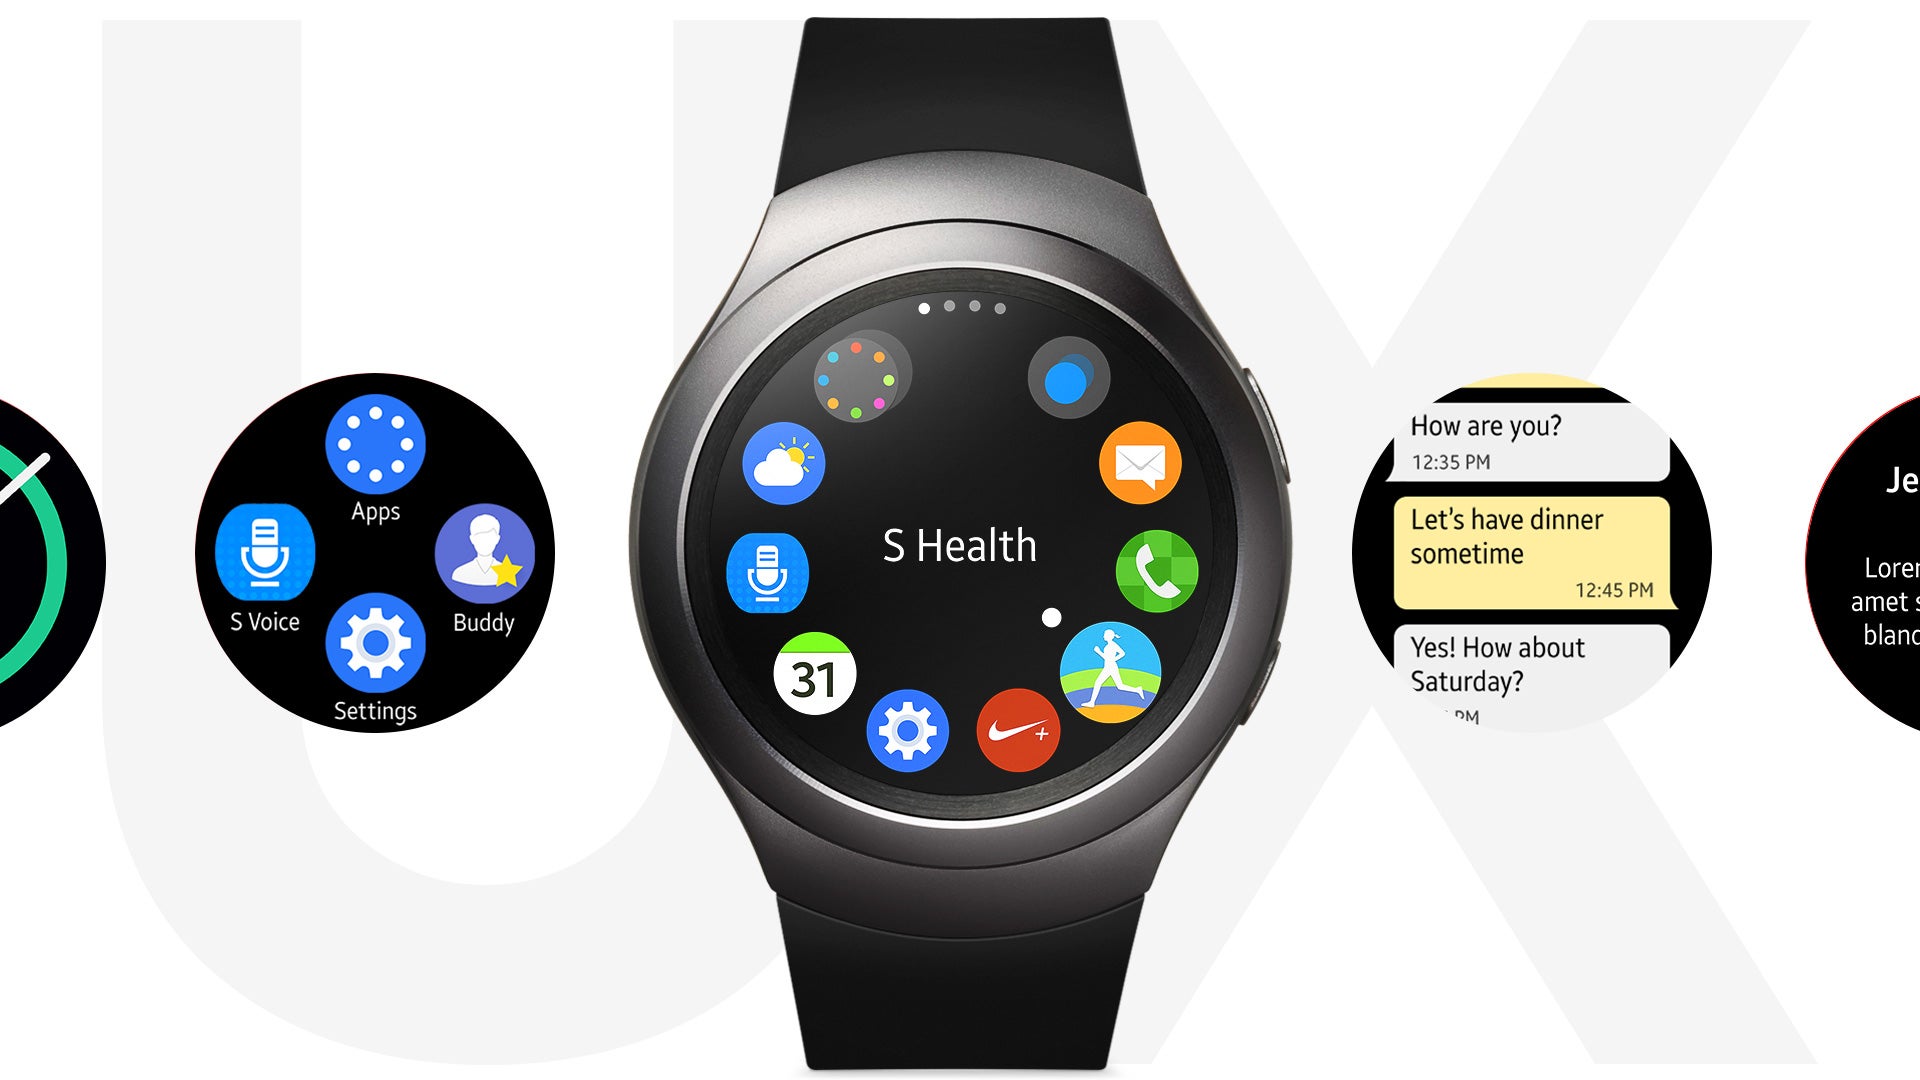 Deal: Grab the Samsung Gear S2 for just $159 (normally $299)